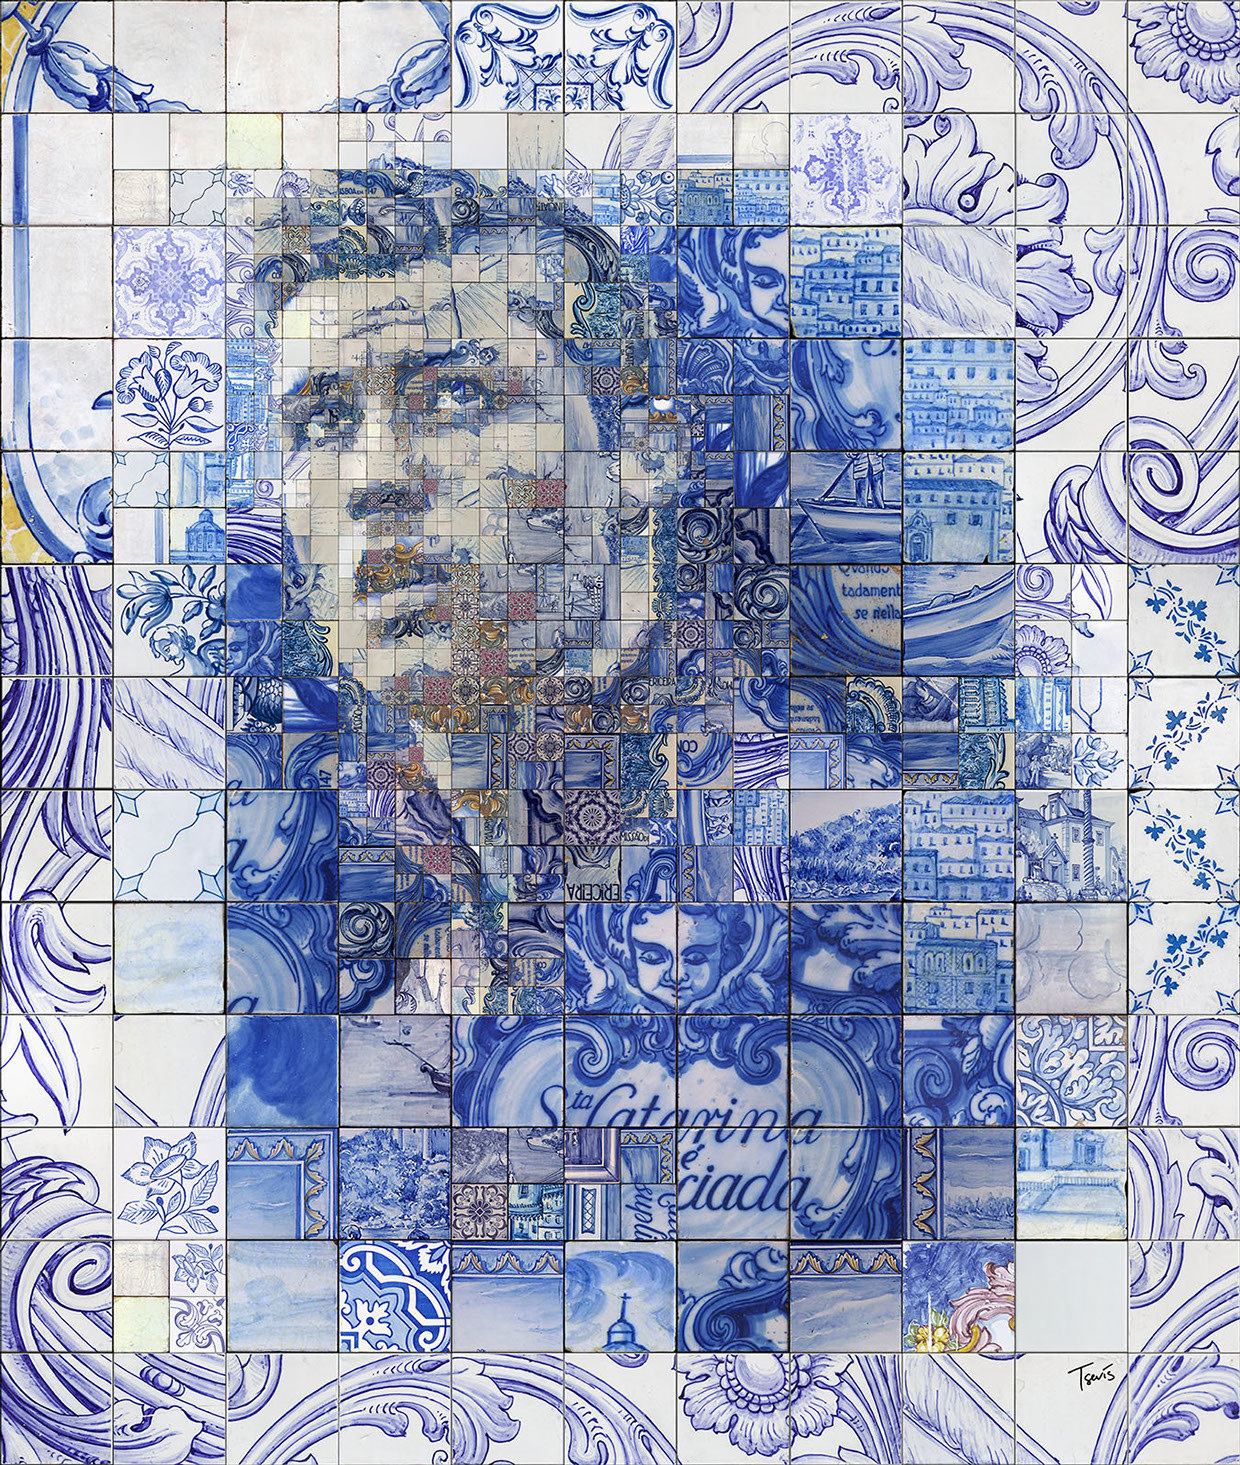 Cristiano x Azulejo The pride of old and contemporary Portugal collide. Designer Charis Tsevis created a series of Cristiano Ronaldo-inspired mosaic illustrations based on the great Portuguese tradition of Azulejo.
[[MORE]]
For some background on...